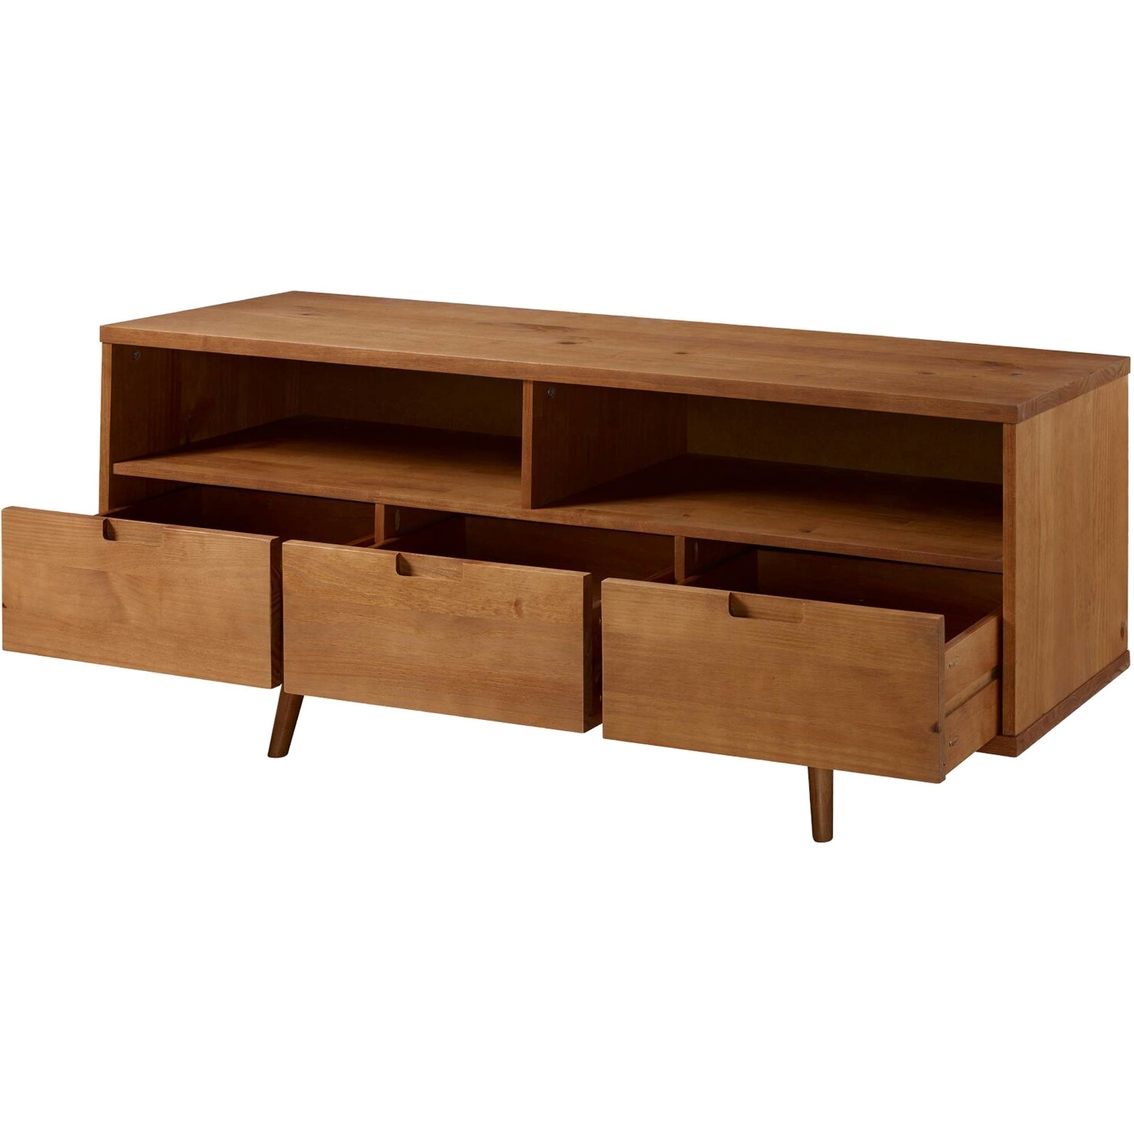 Walker Edison 58 in. Mid Century Modern 3 Drawer Solid Wood TV Stand - Image 2 of 4